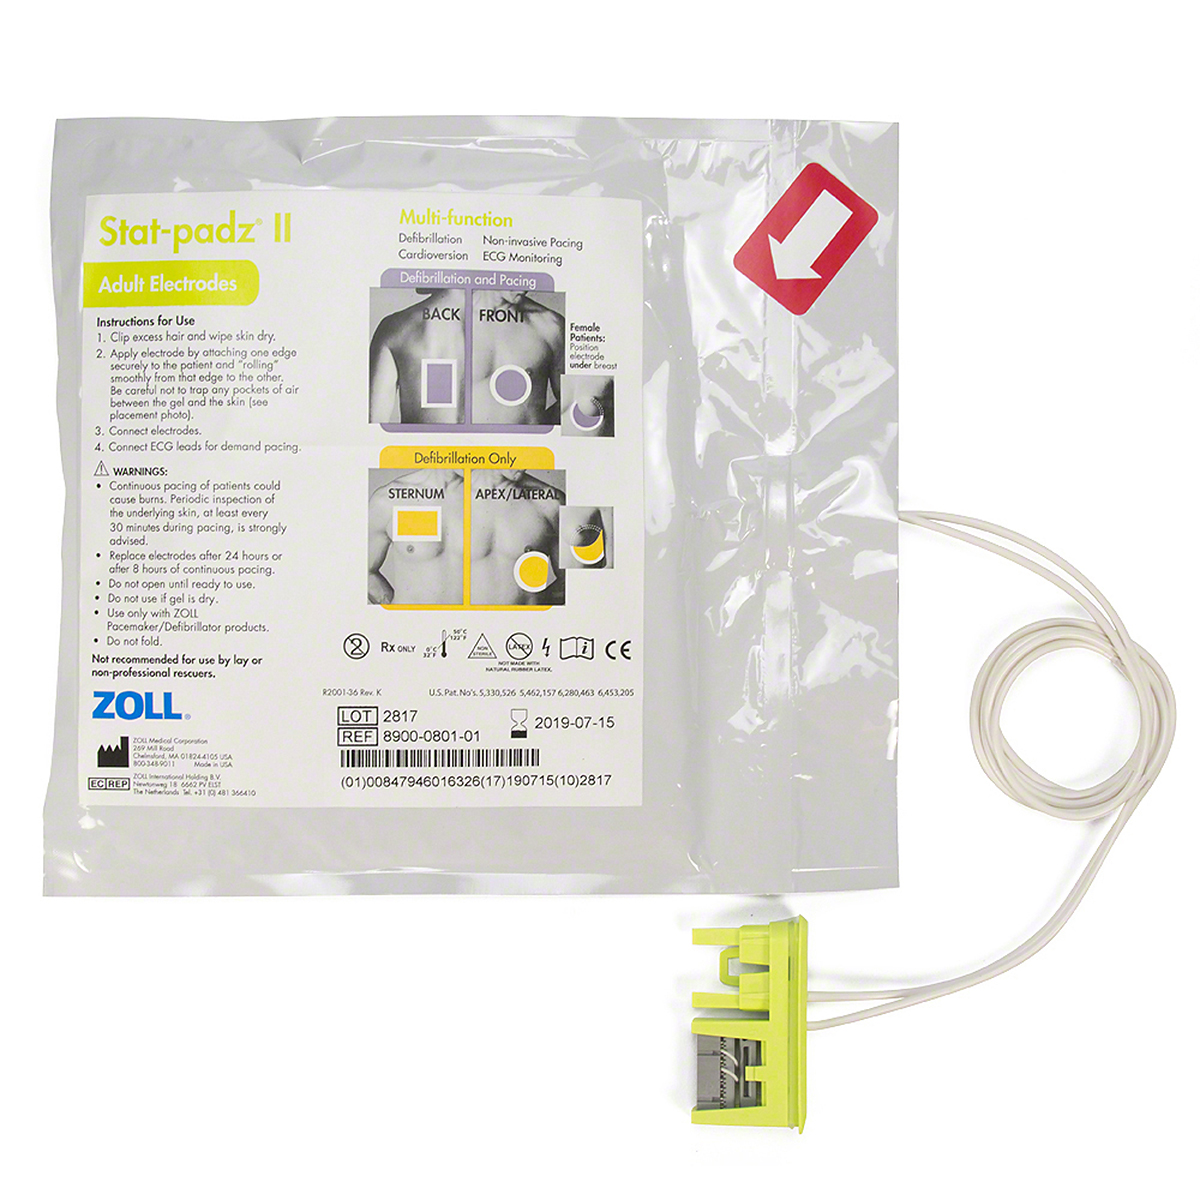 ZOLL AED Stat Padz 8900 0801 01 V1